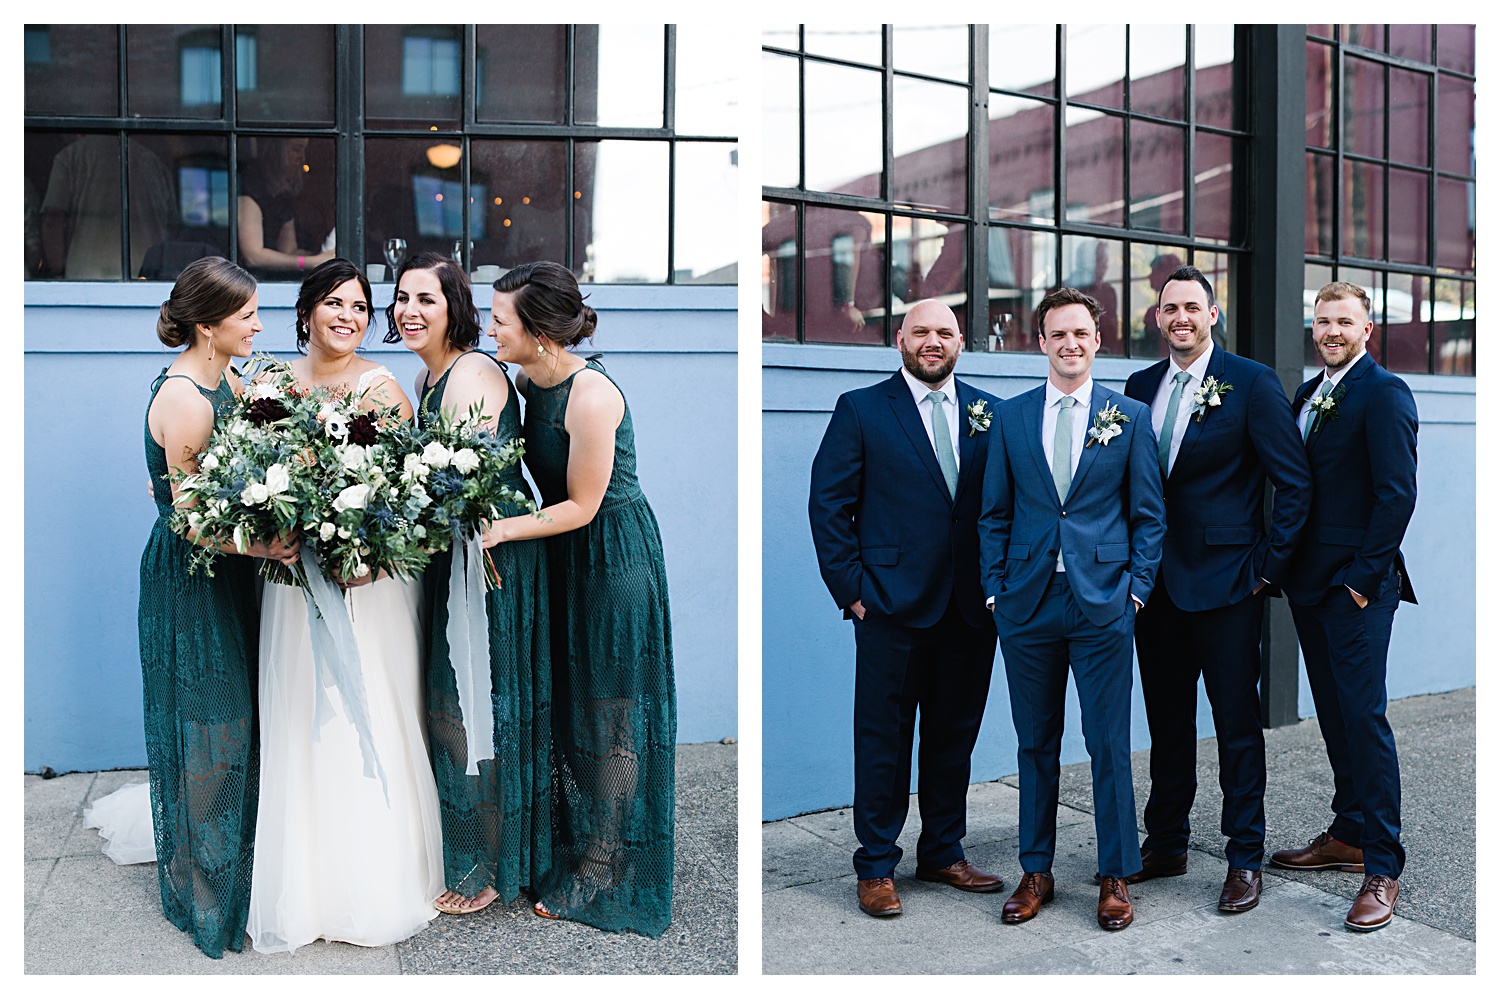 bride with bridesmaids and groom with groomsmen